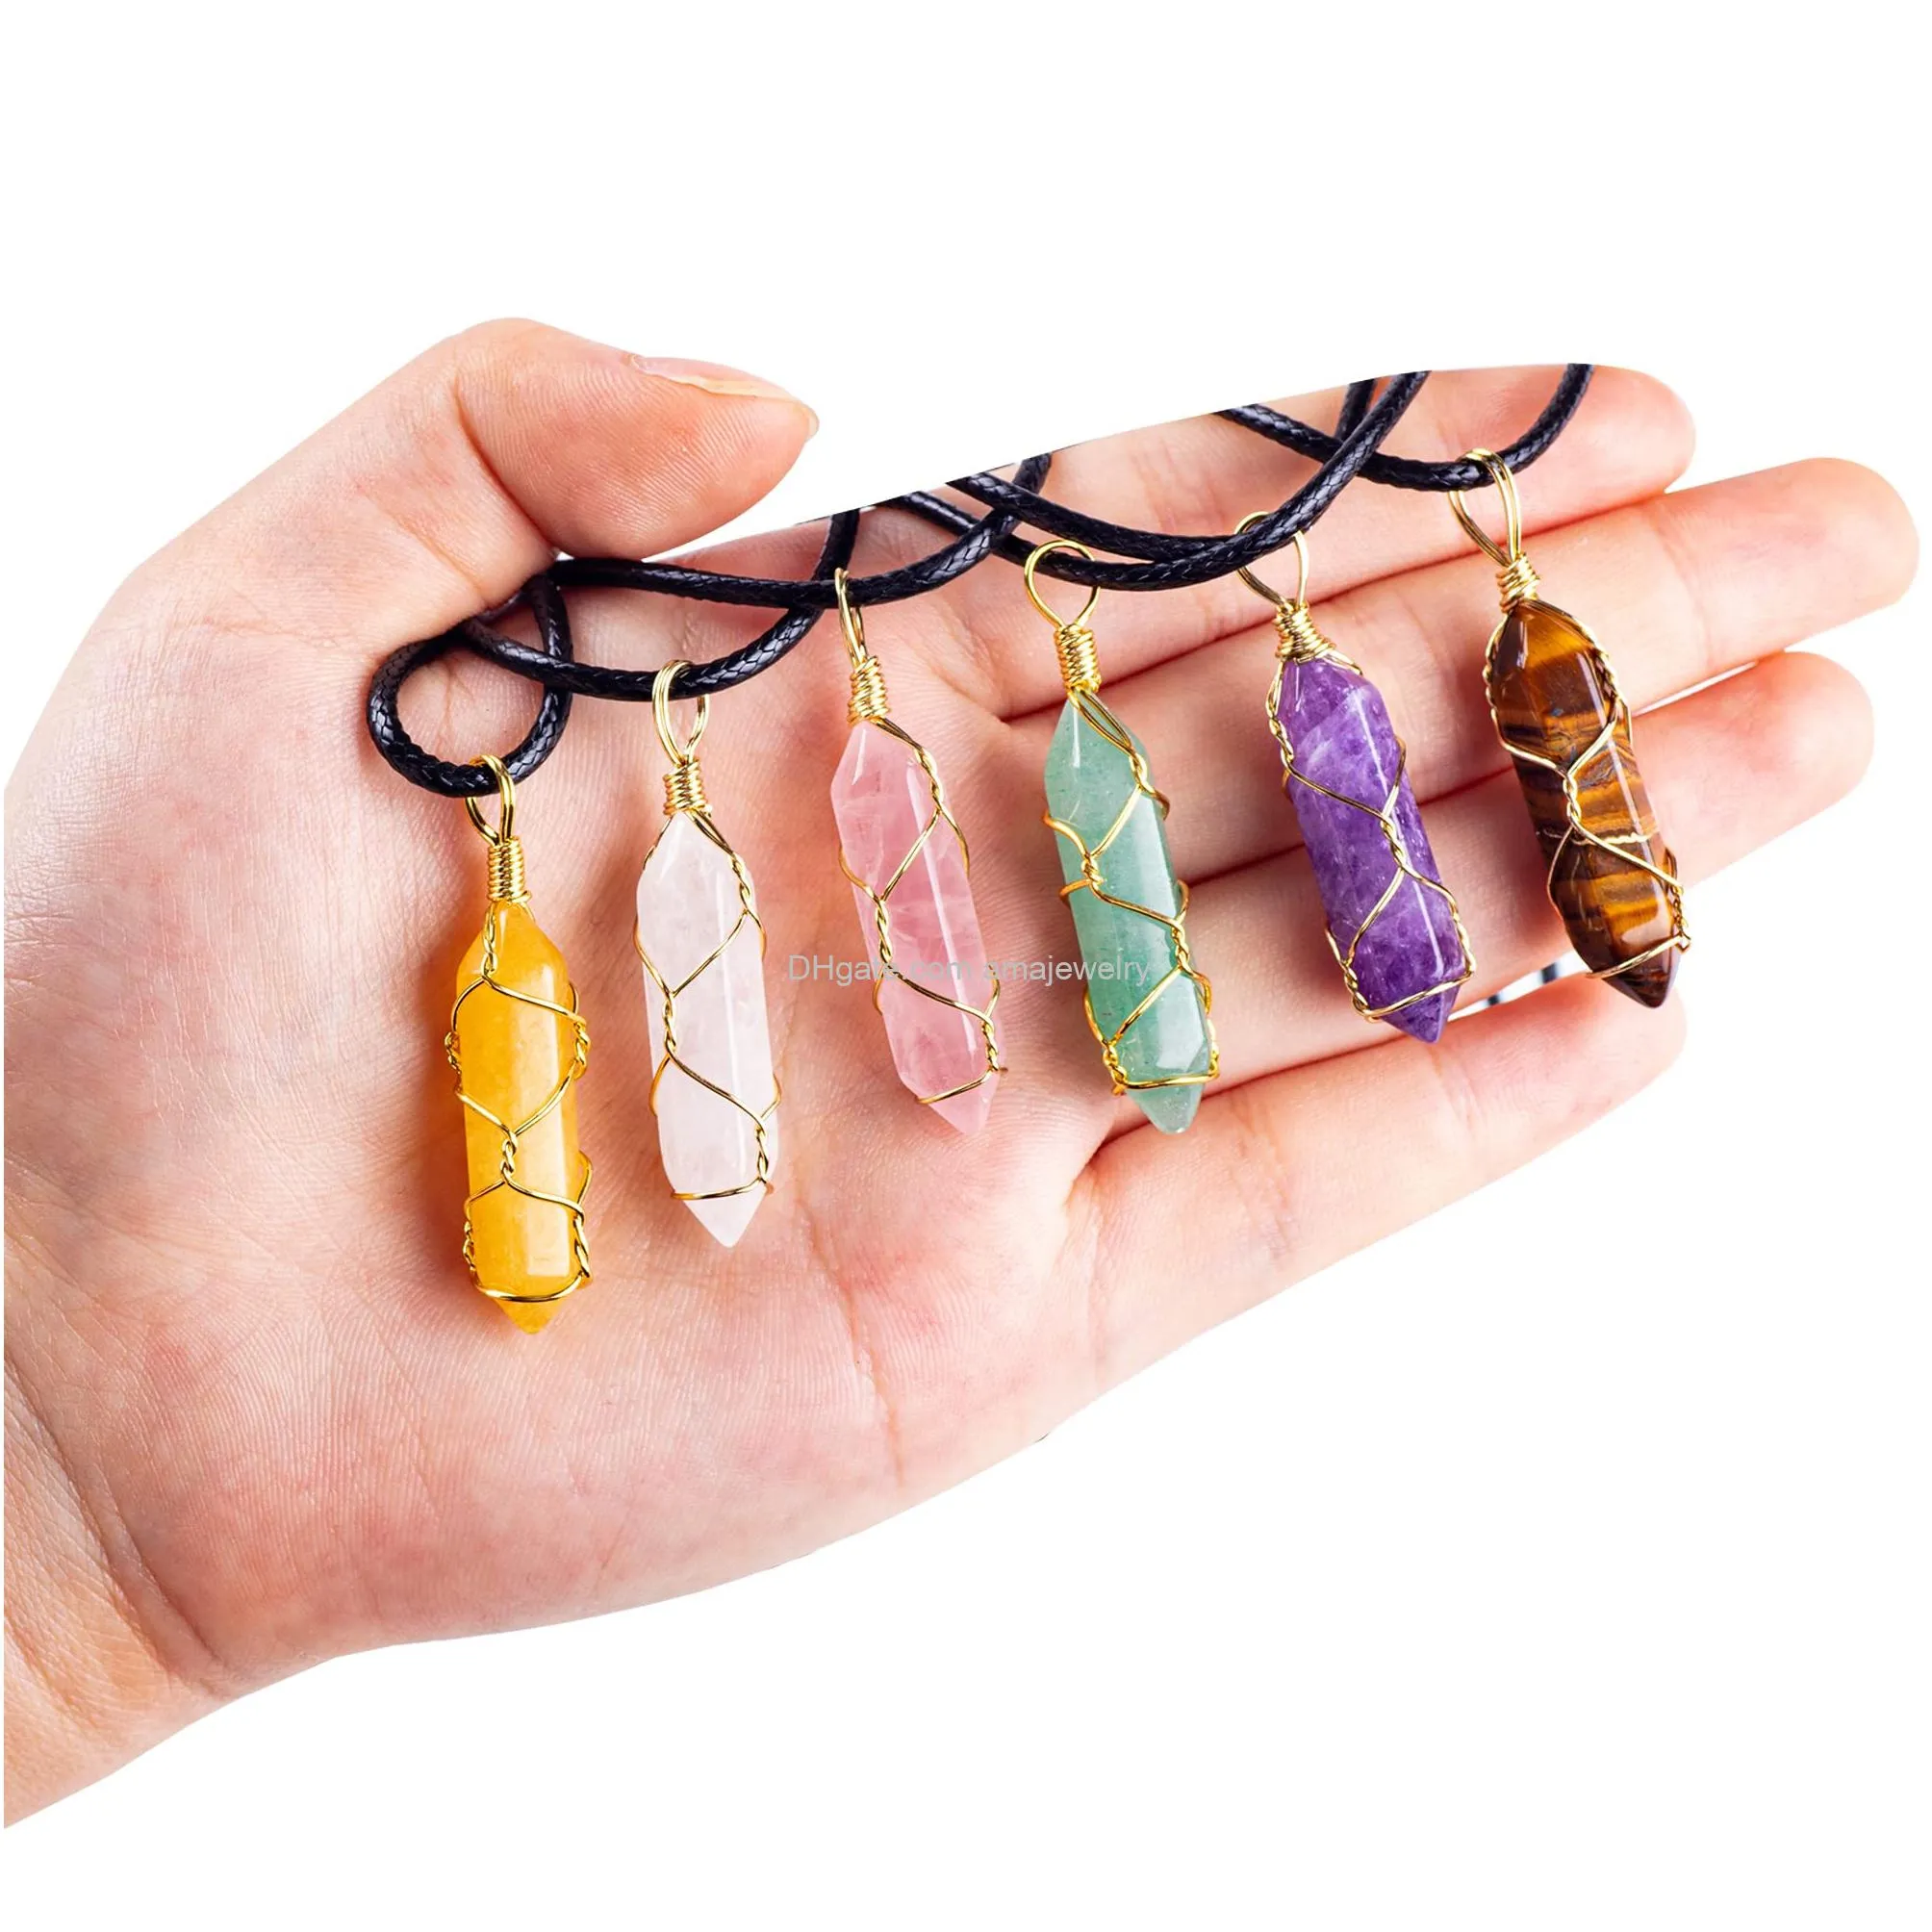 natural hexagonal crystal necklace healing chakra crystals necklaces gold wire wrapped doubled pointed crystal pendant necklace for women